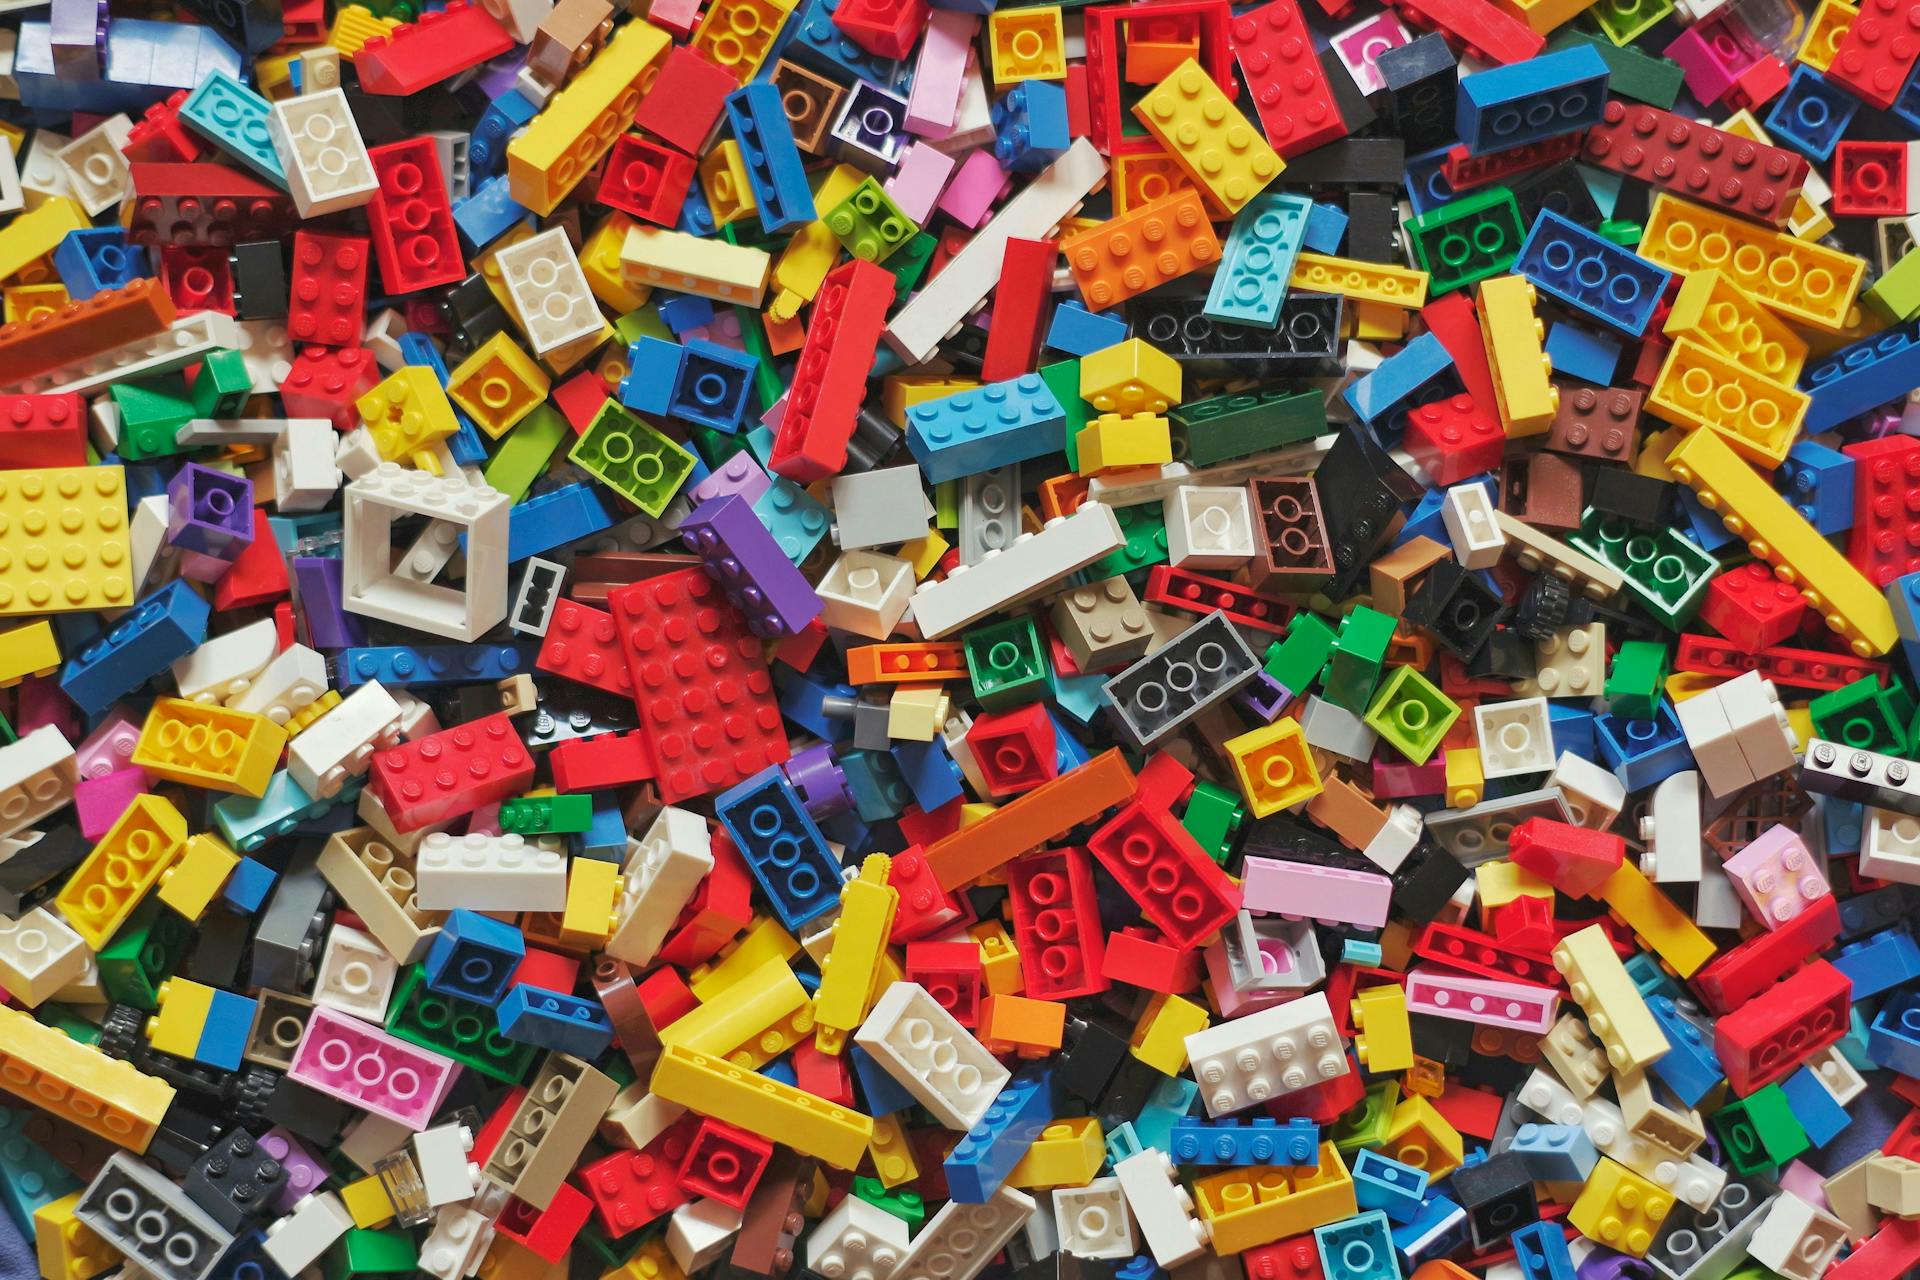 Building a social media strategy for 2021. Image of large pile of multi-colored lego bricks